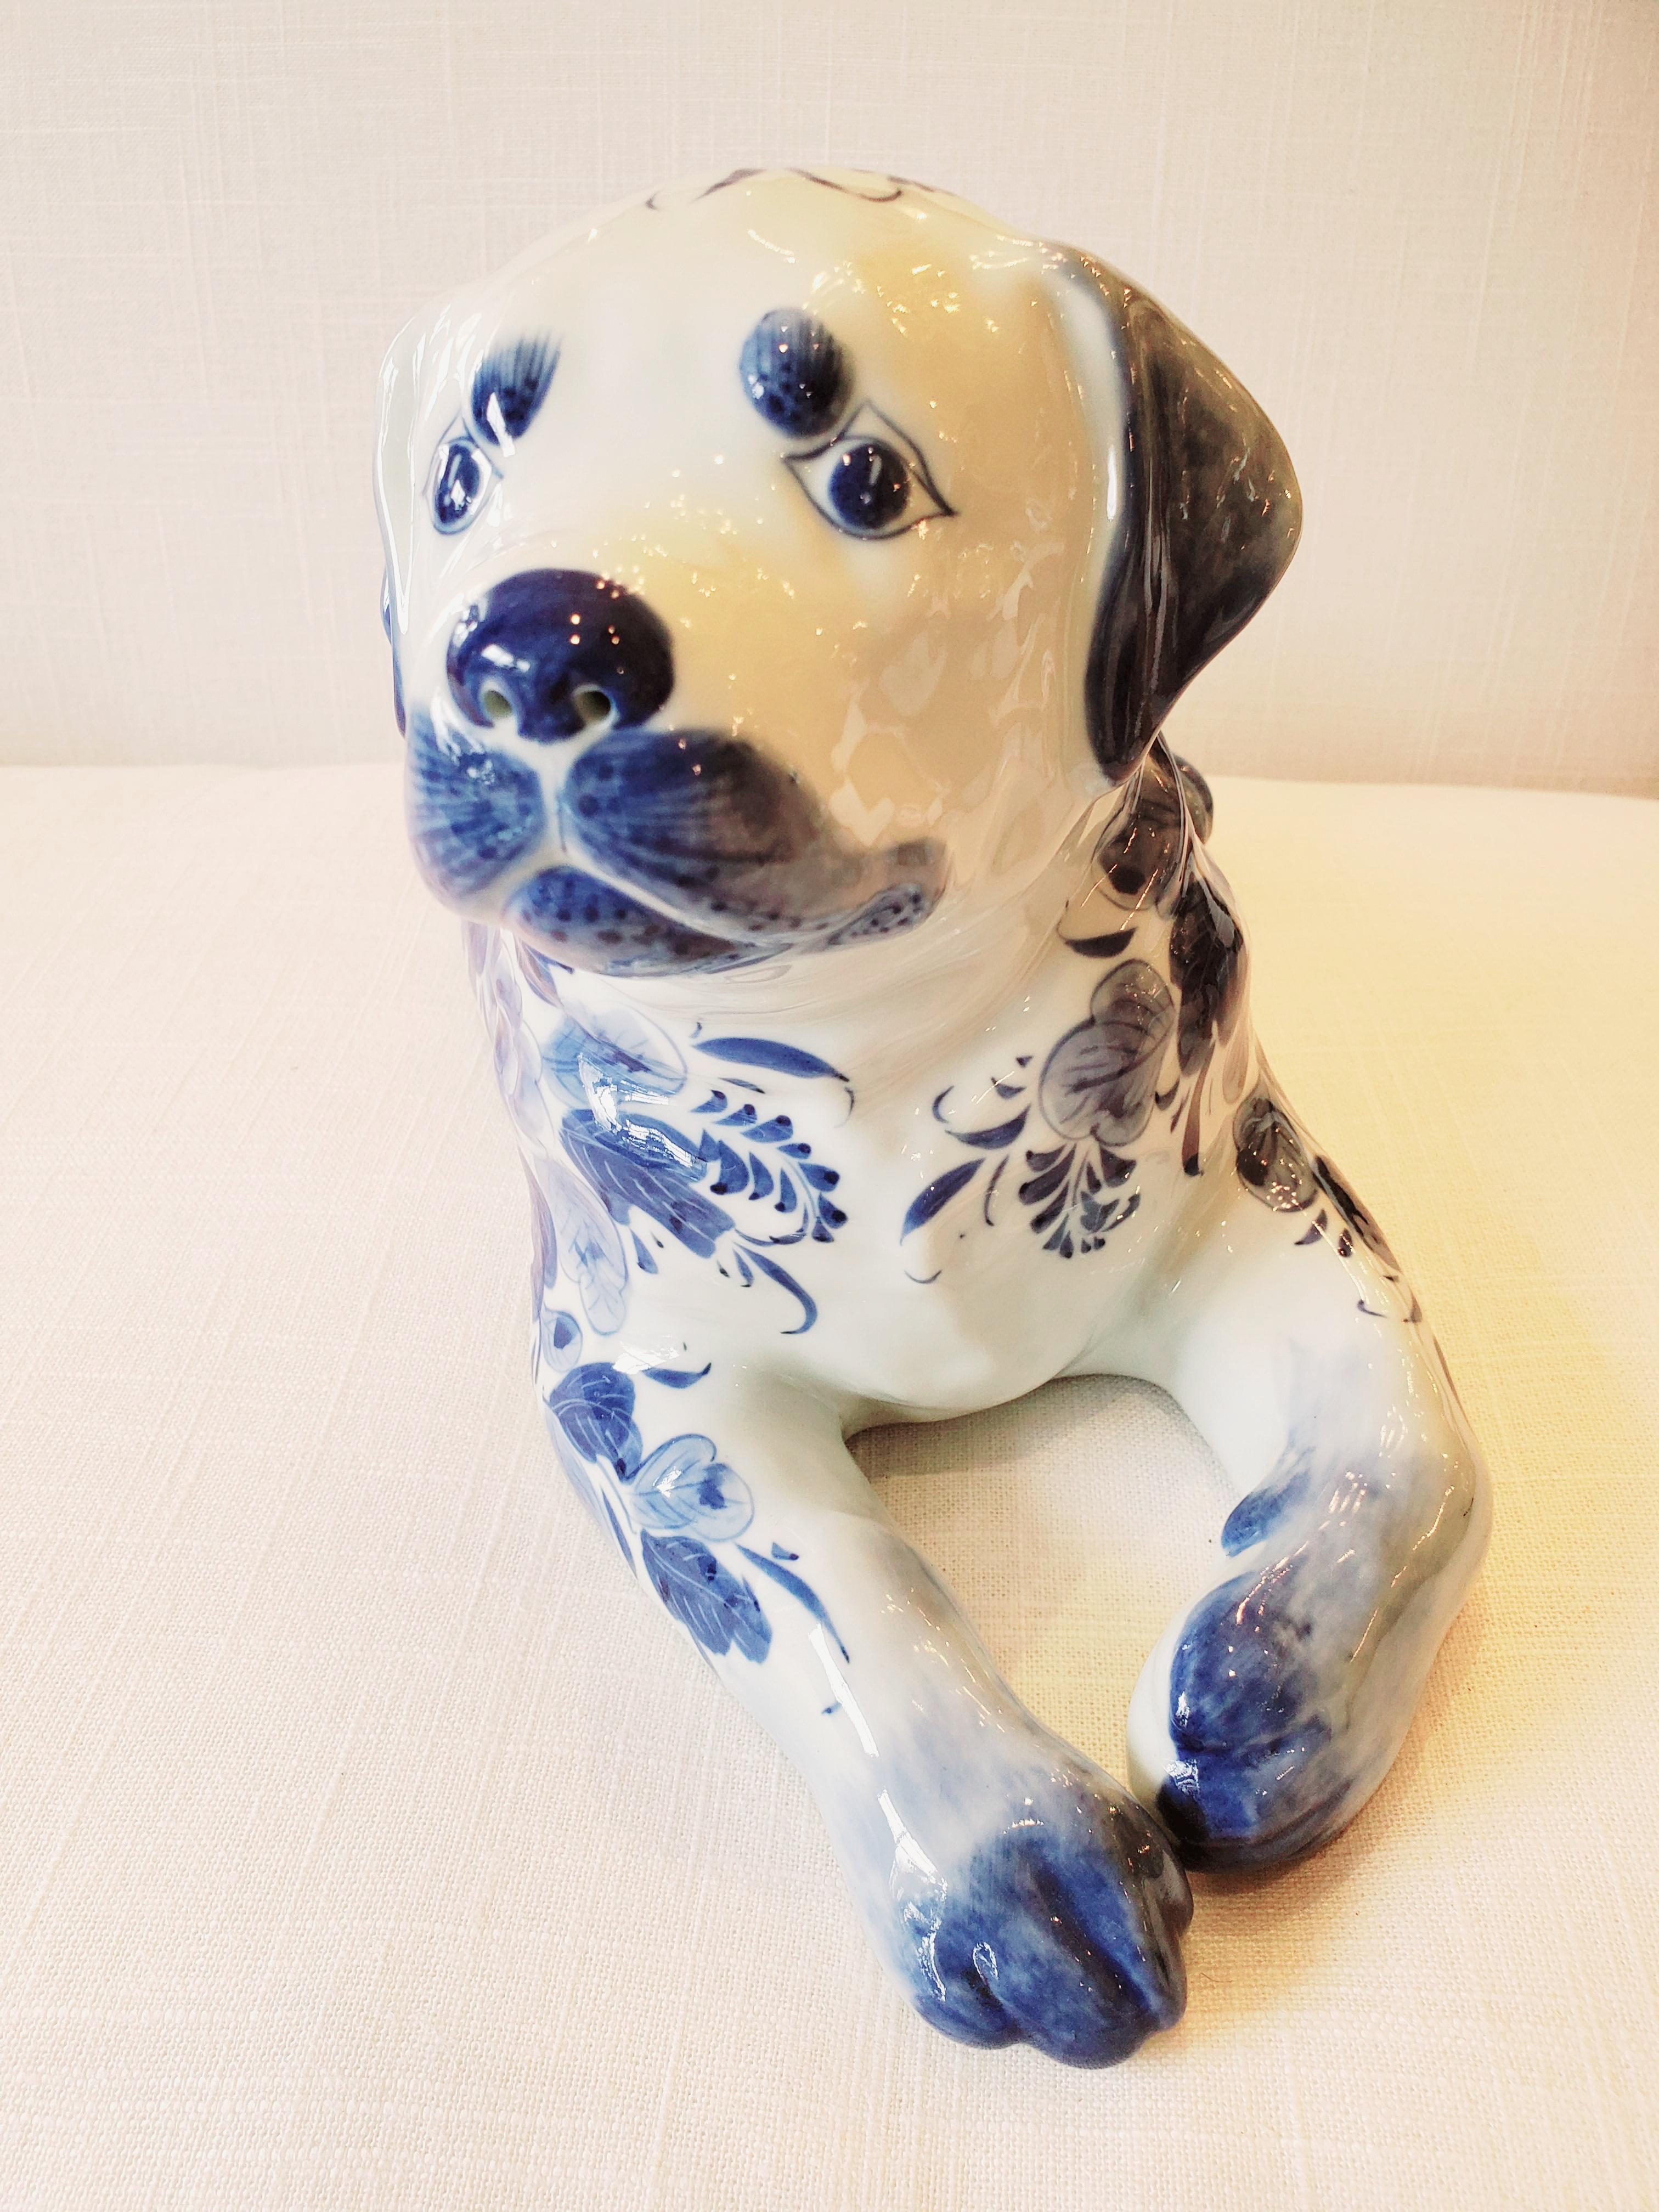 An adorable reclining porcelain dog accessory to dress up any book shelf or table in a pretty blue and white pattern.